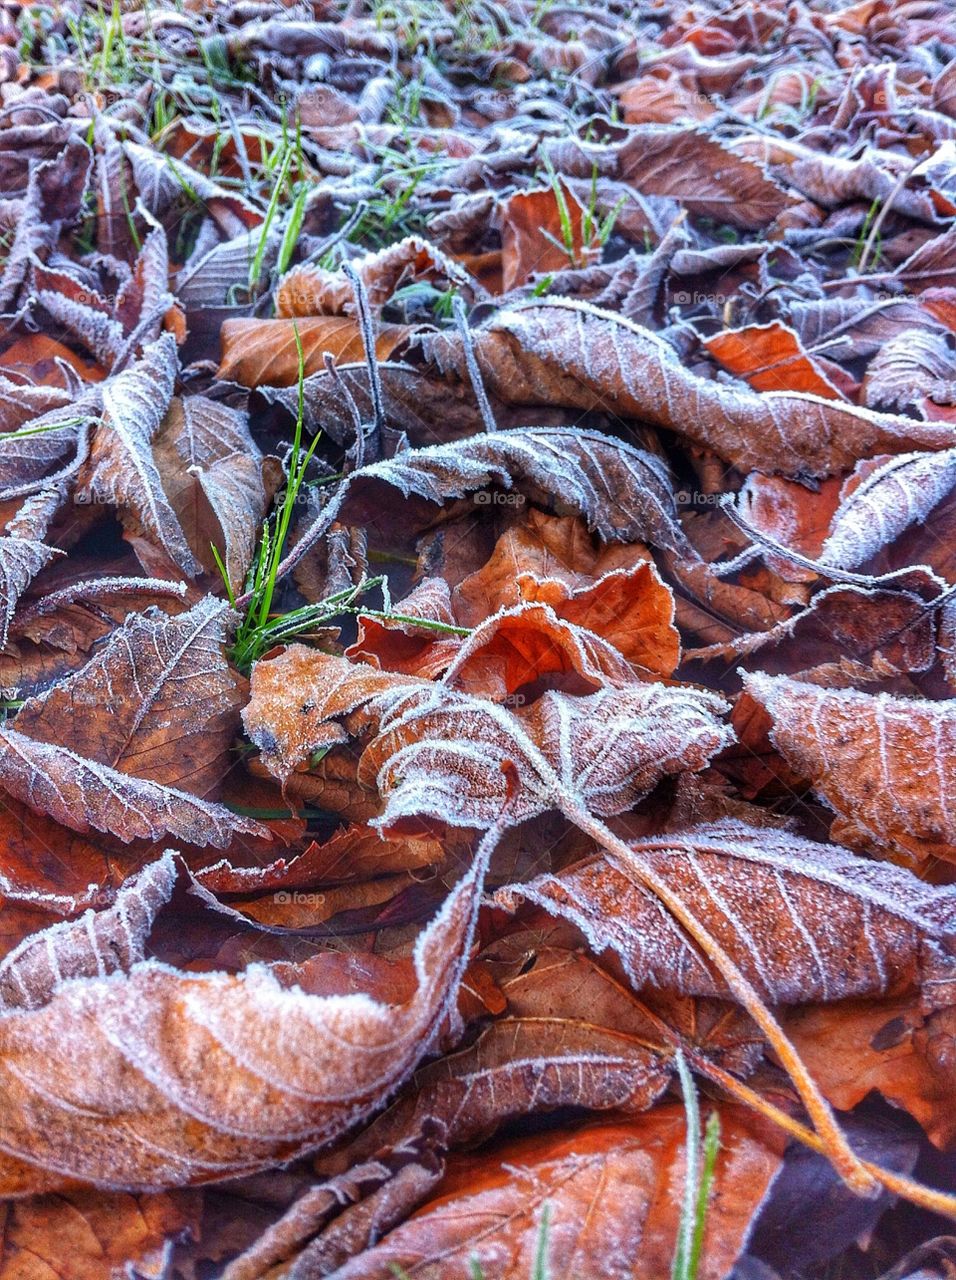 Frosty winter start! Frost covered grass and leaves in the garden.